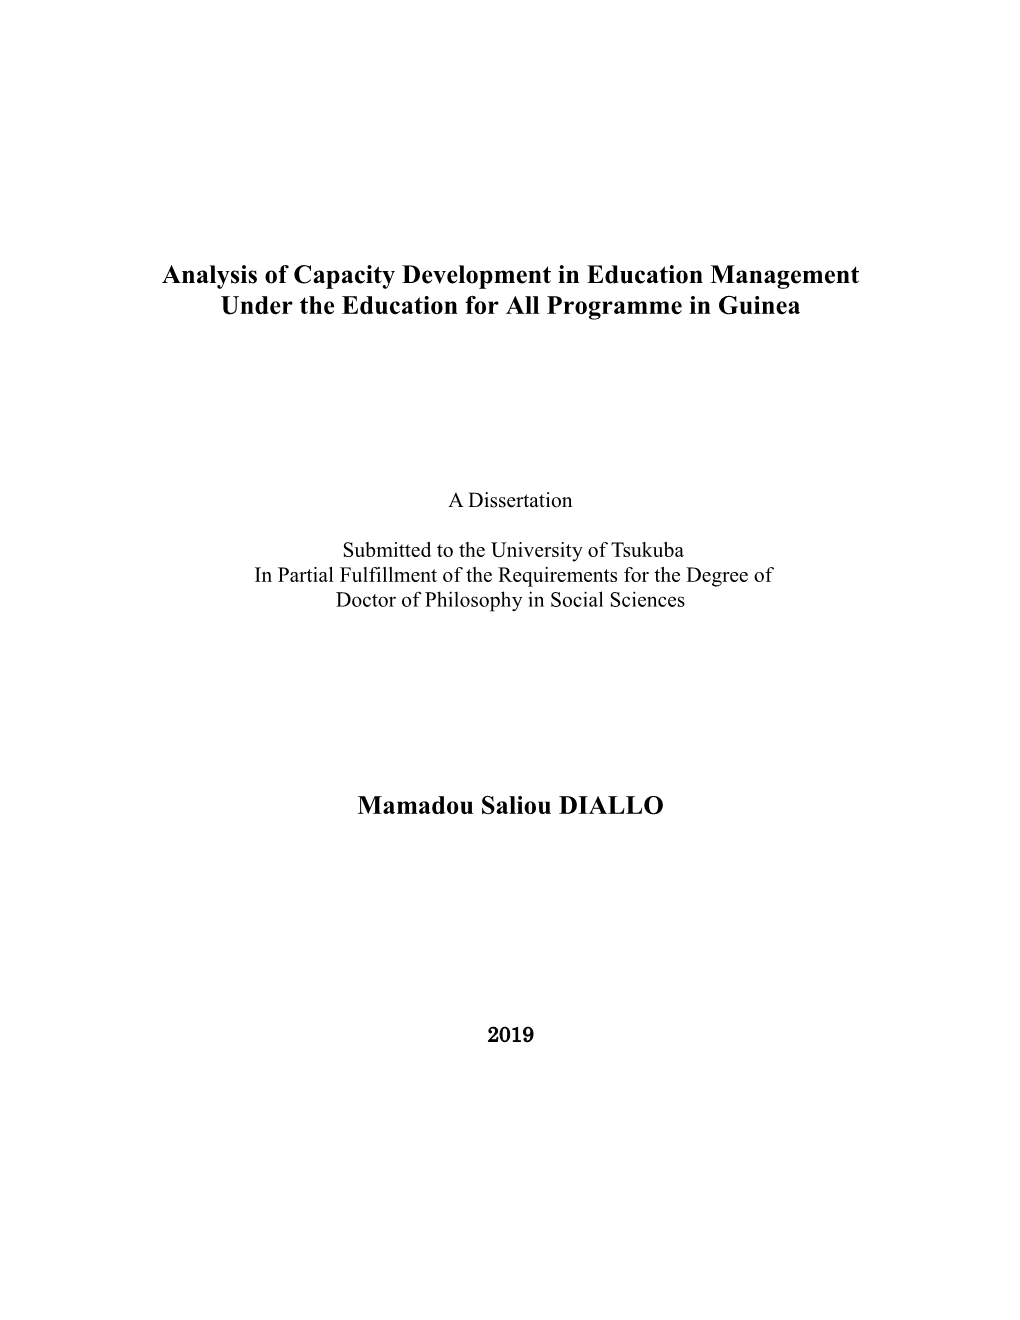 Analysis of Capacity Development in Education Management Under the Education for All Programme in Guinea